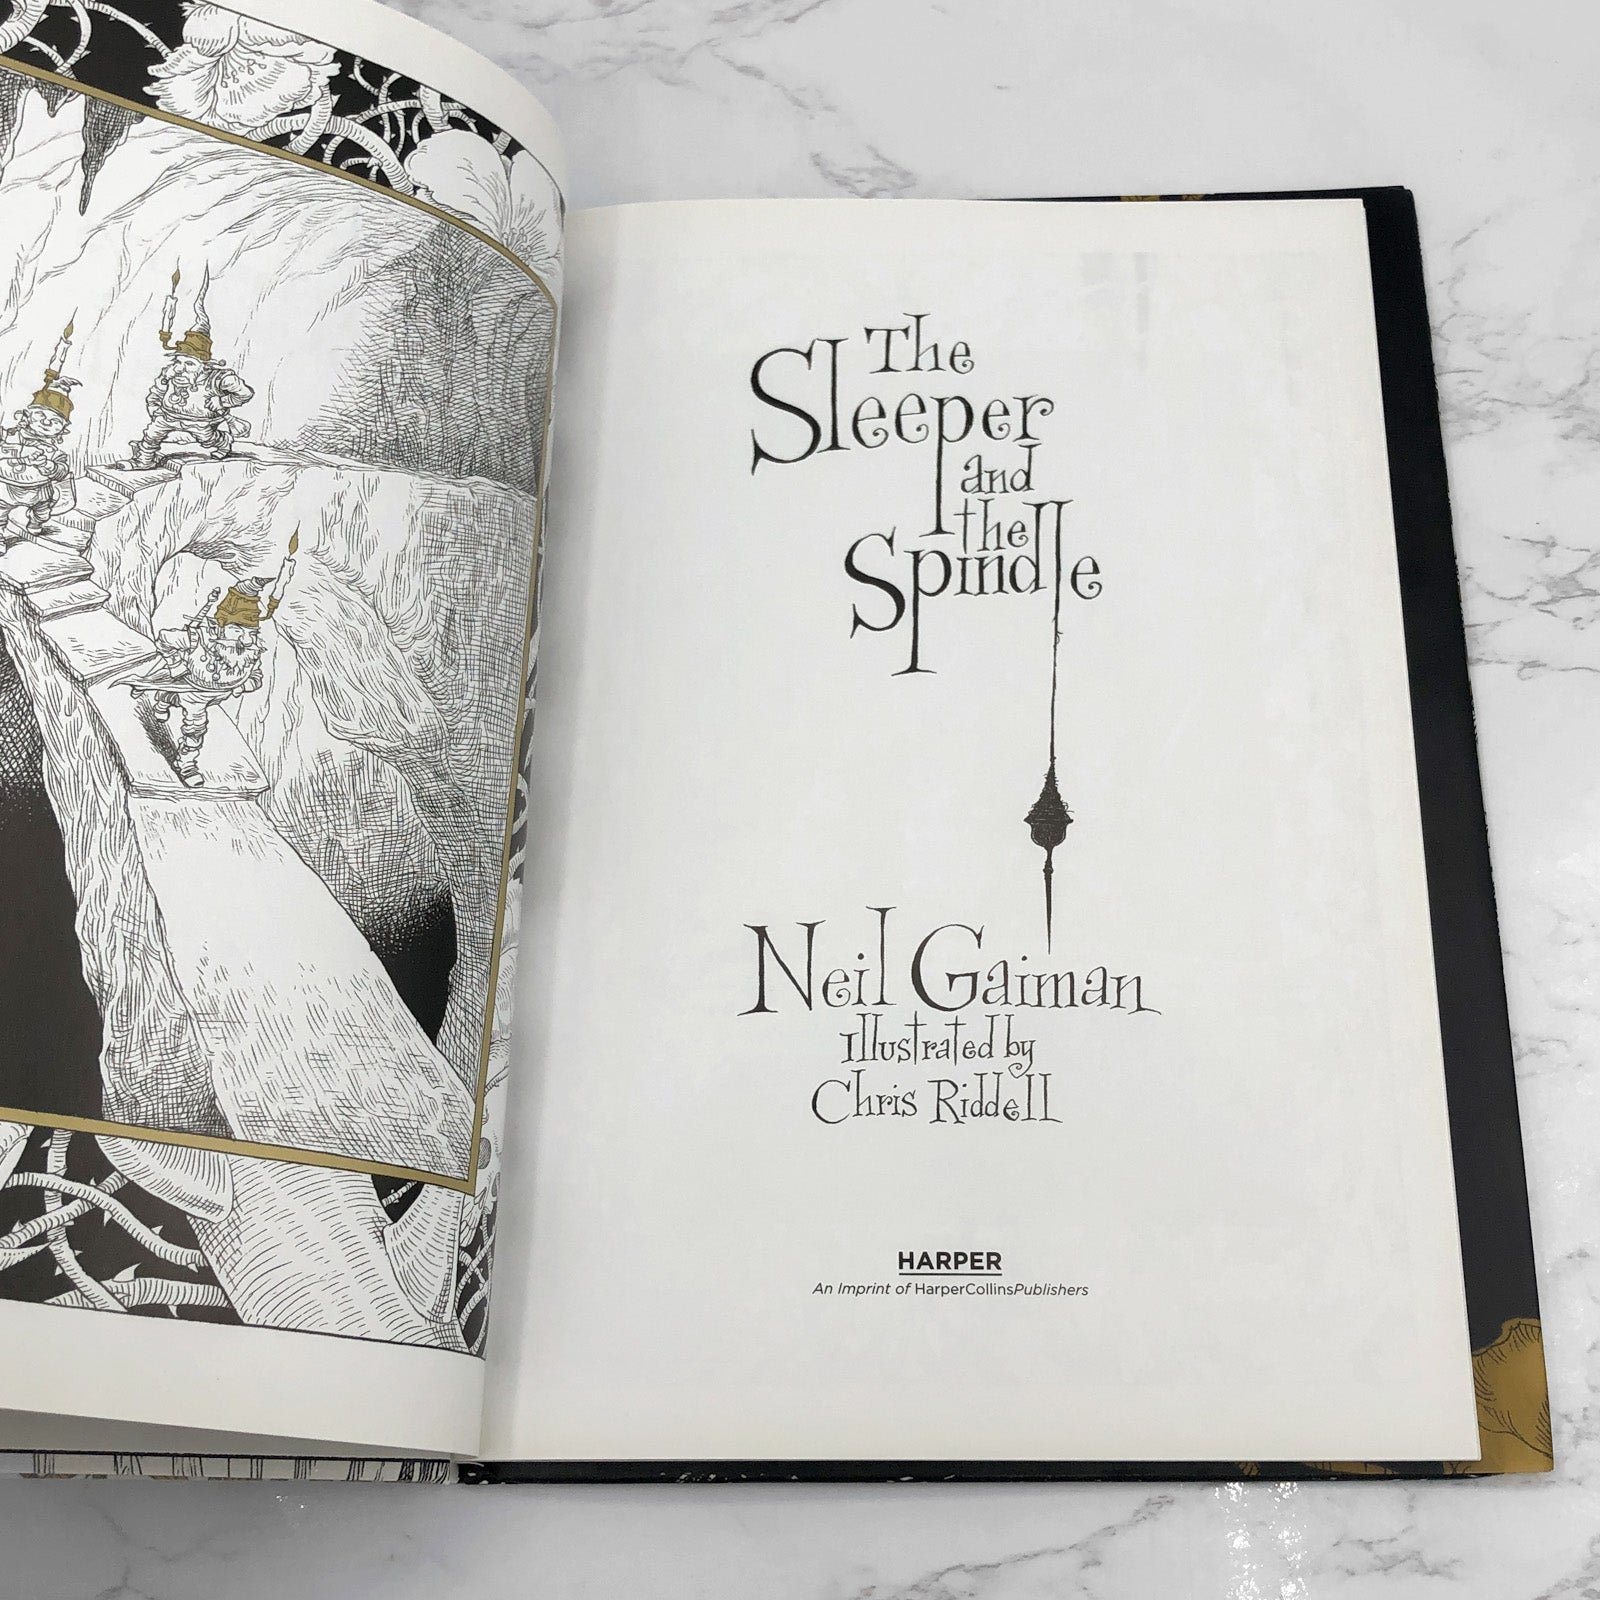 Chris　and　Gaiman　Riddell　the　by　Spindle　Neil　The　Sleeper